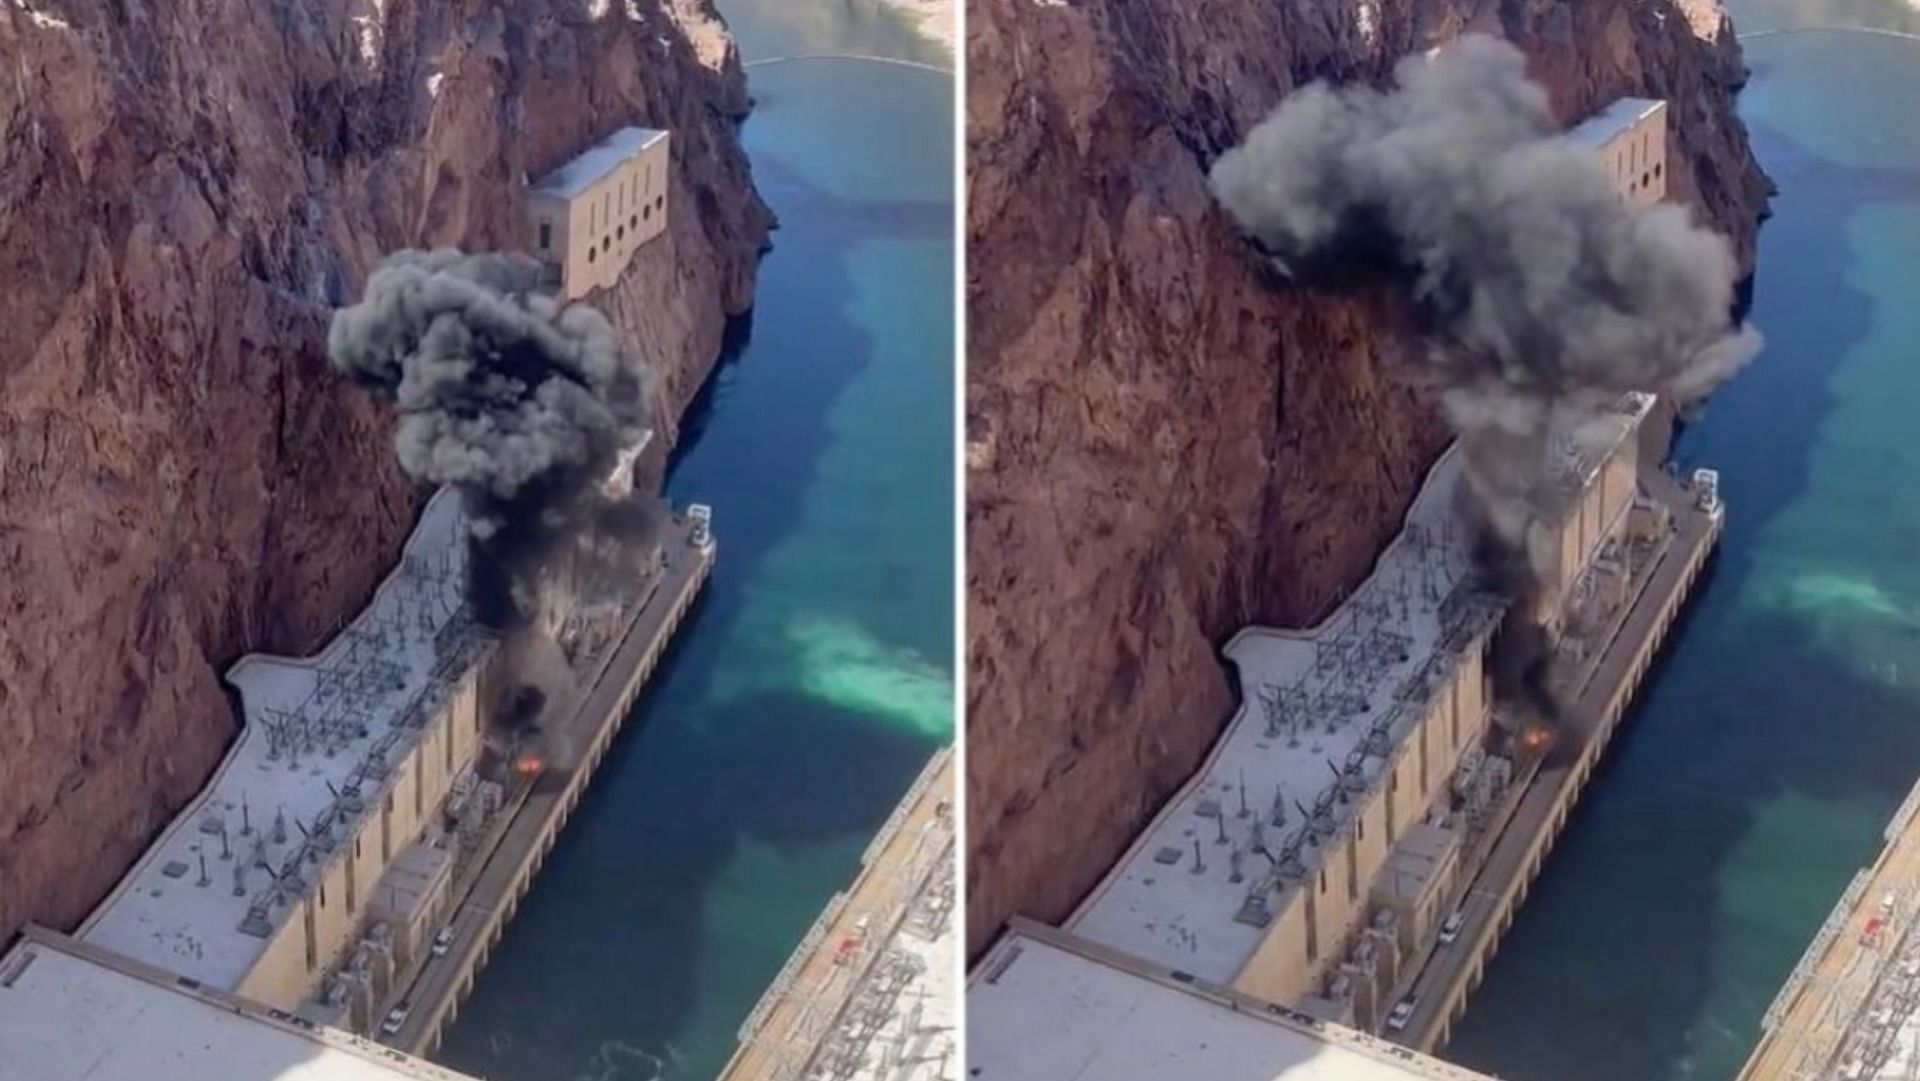 Hoover Dam saw an explosion in one of its transformers on July 19 at around 10 in the morning. (Image via @haboczki/Twitter)